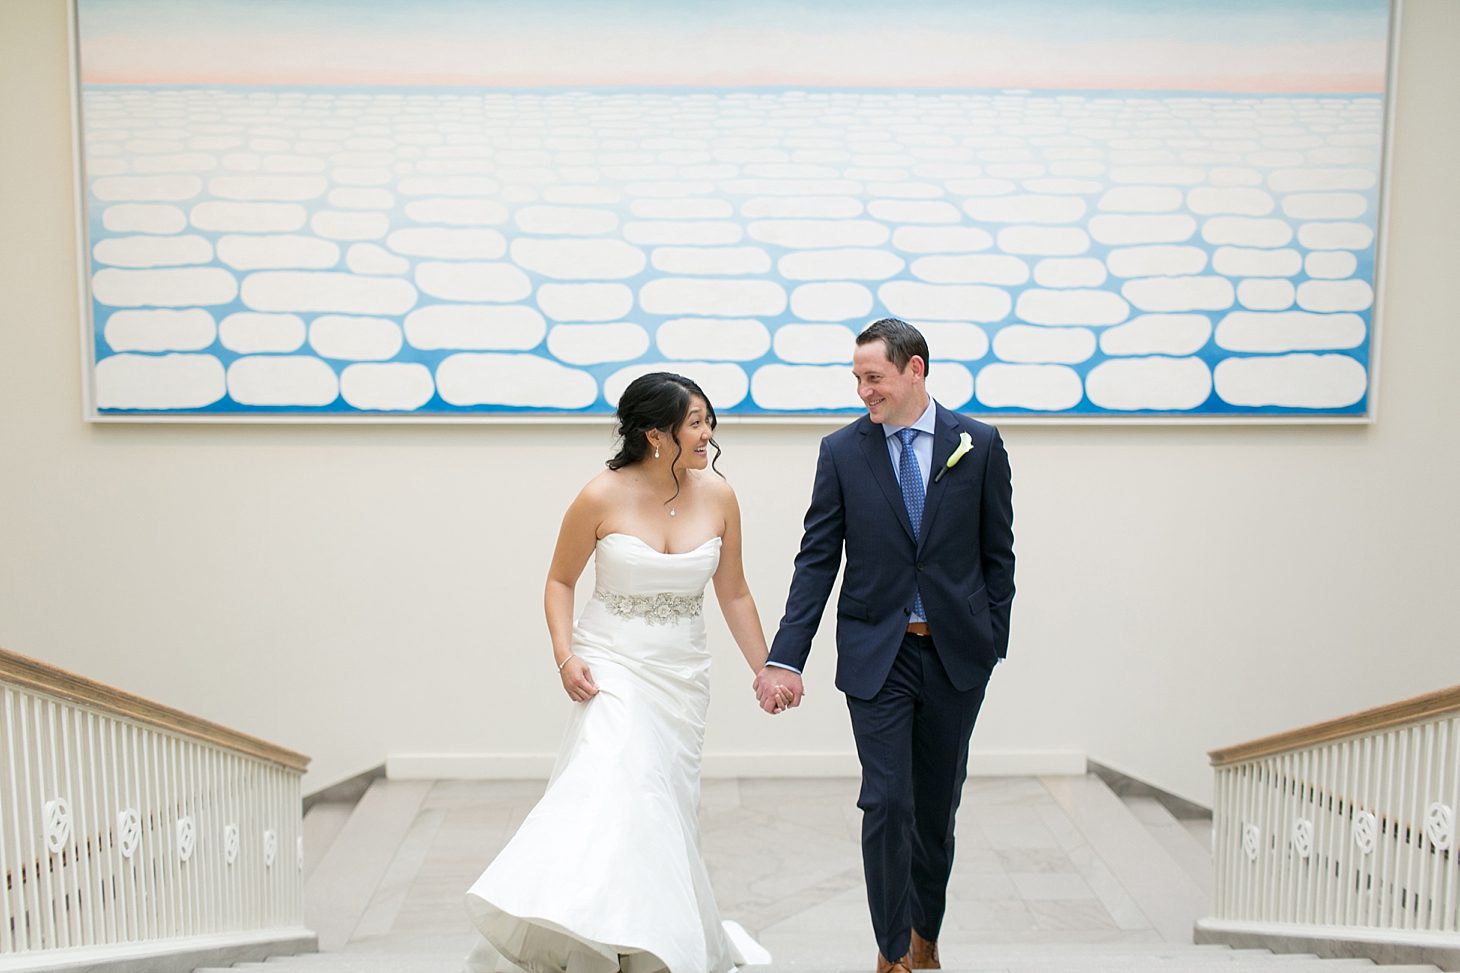 Art Institute of Chicago Wedding by Christy Tyler Photography_0027